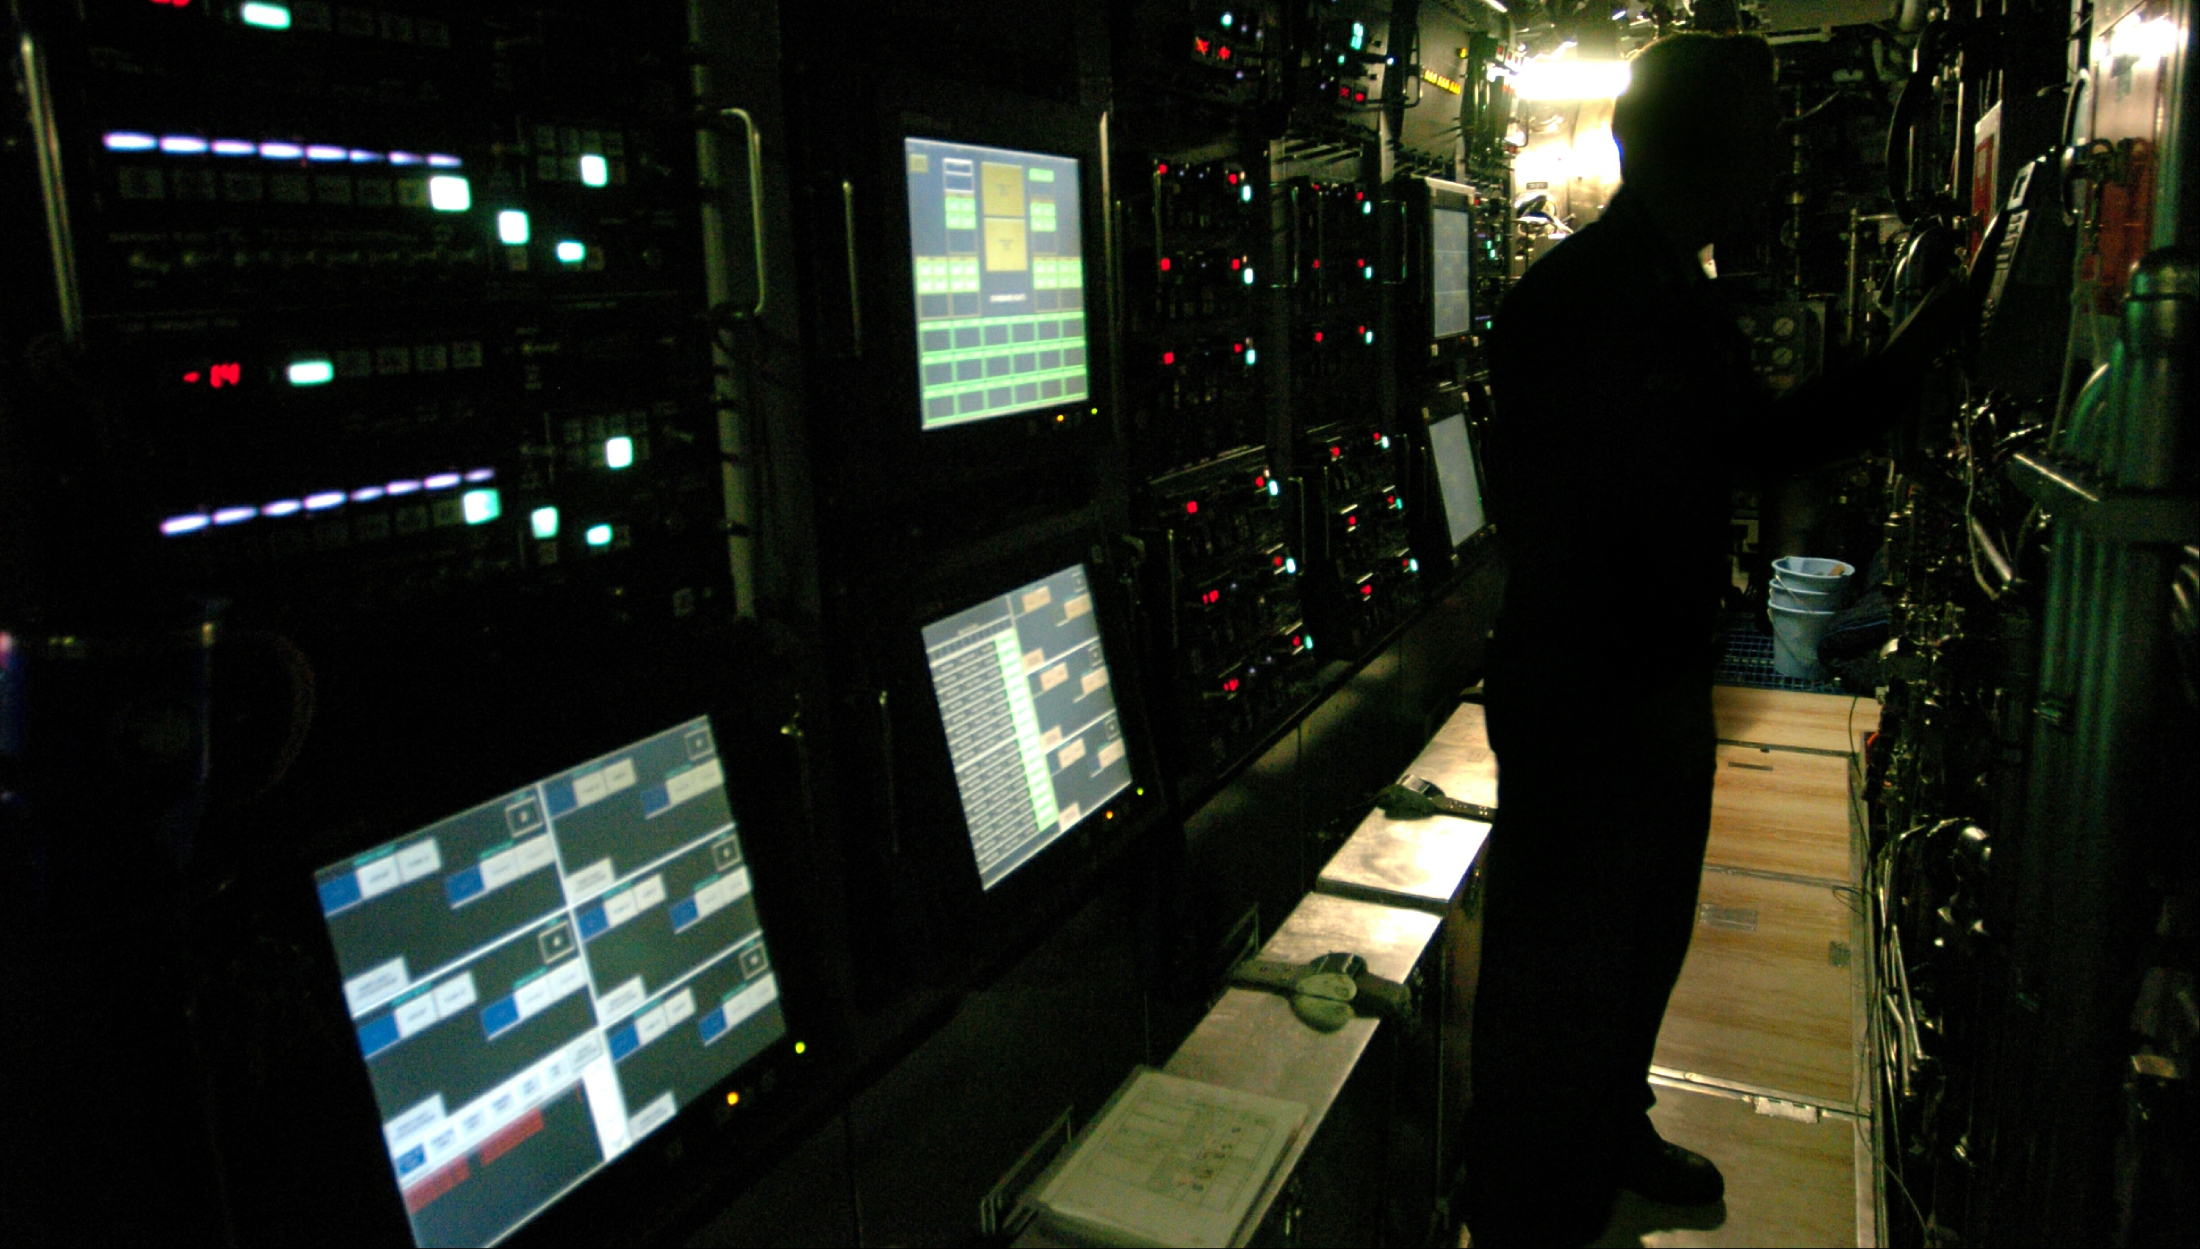 The US plans to develop new nuclear-armed sea-launched cruise missiles that may be deployed on USS Virginia class submarines. Photo: USS Virginia torpedo control, August 2004; James Pinsky, US Navy, wikimedia.org.